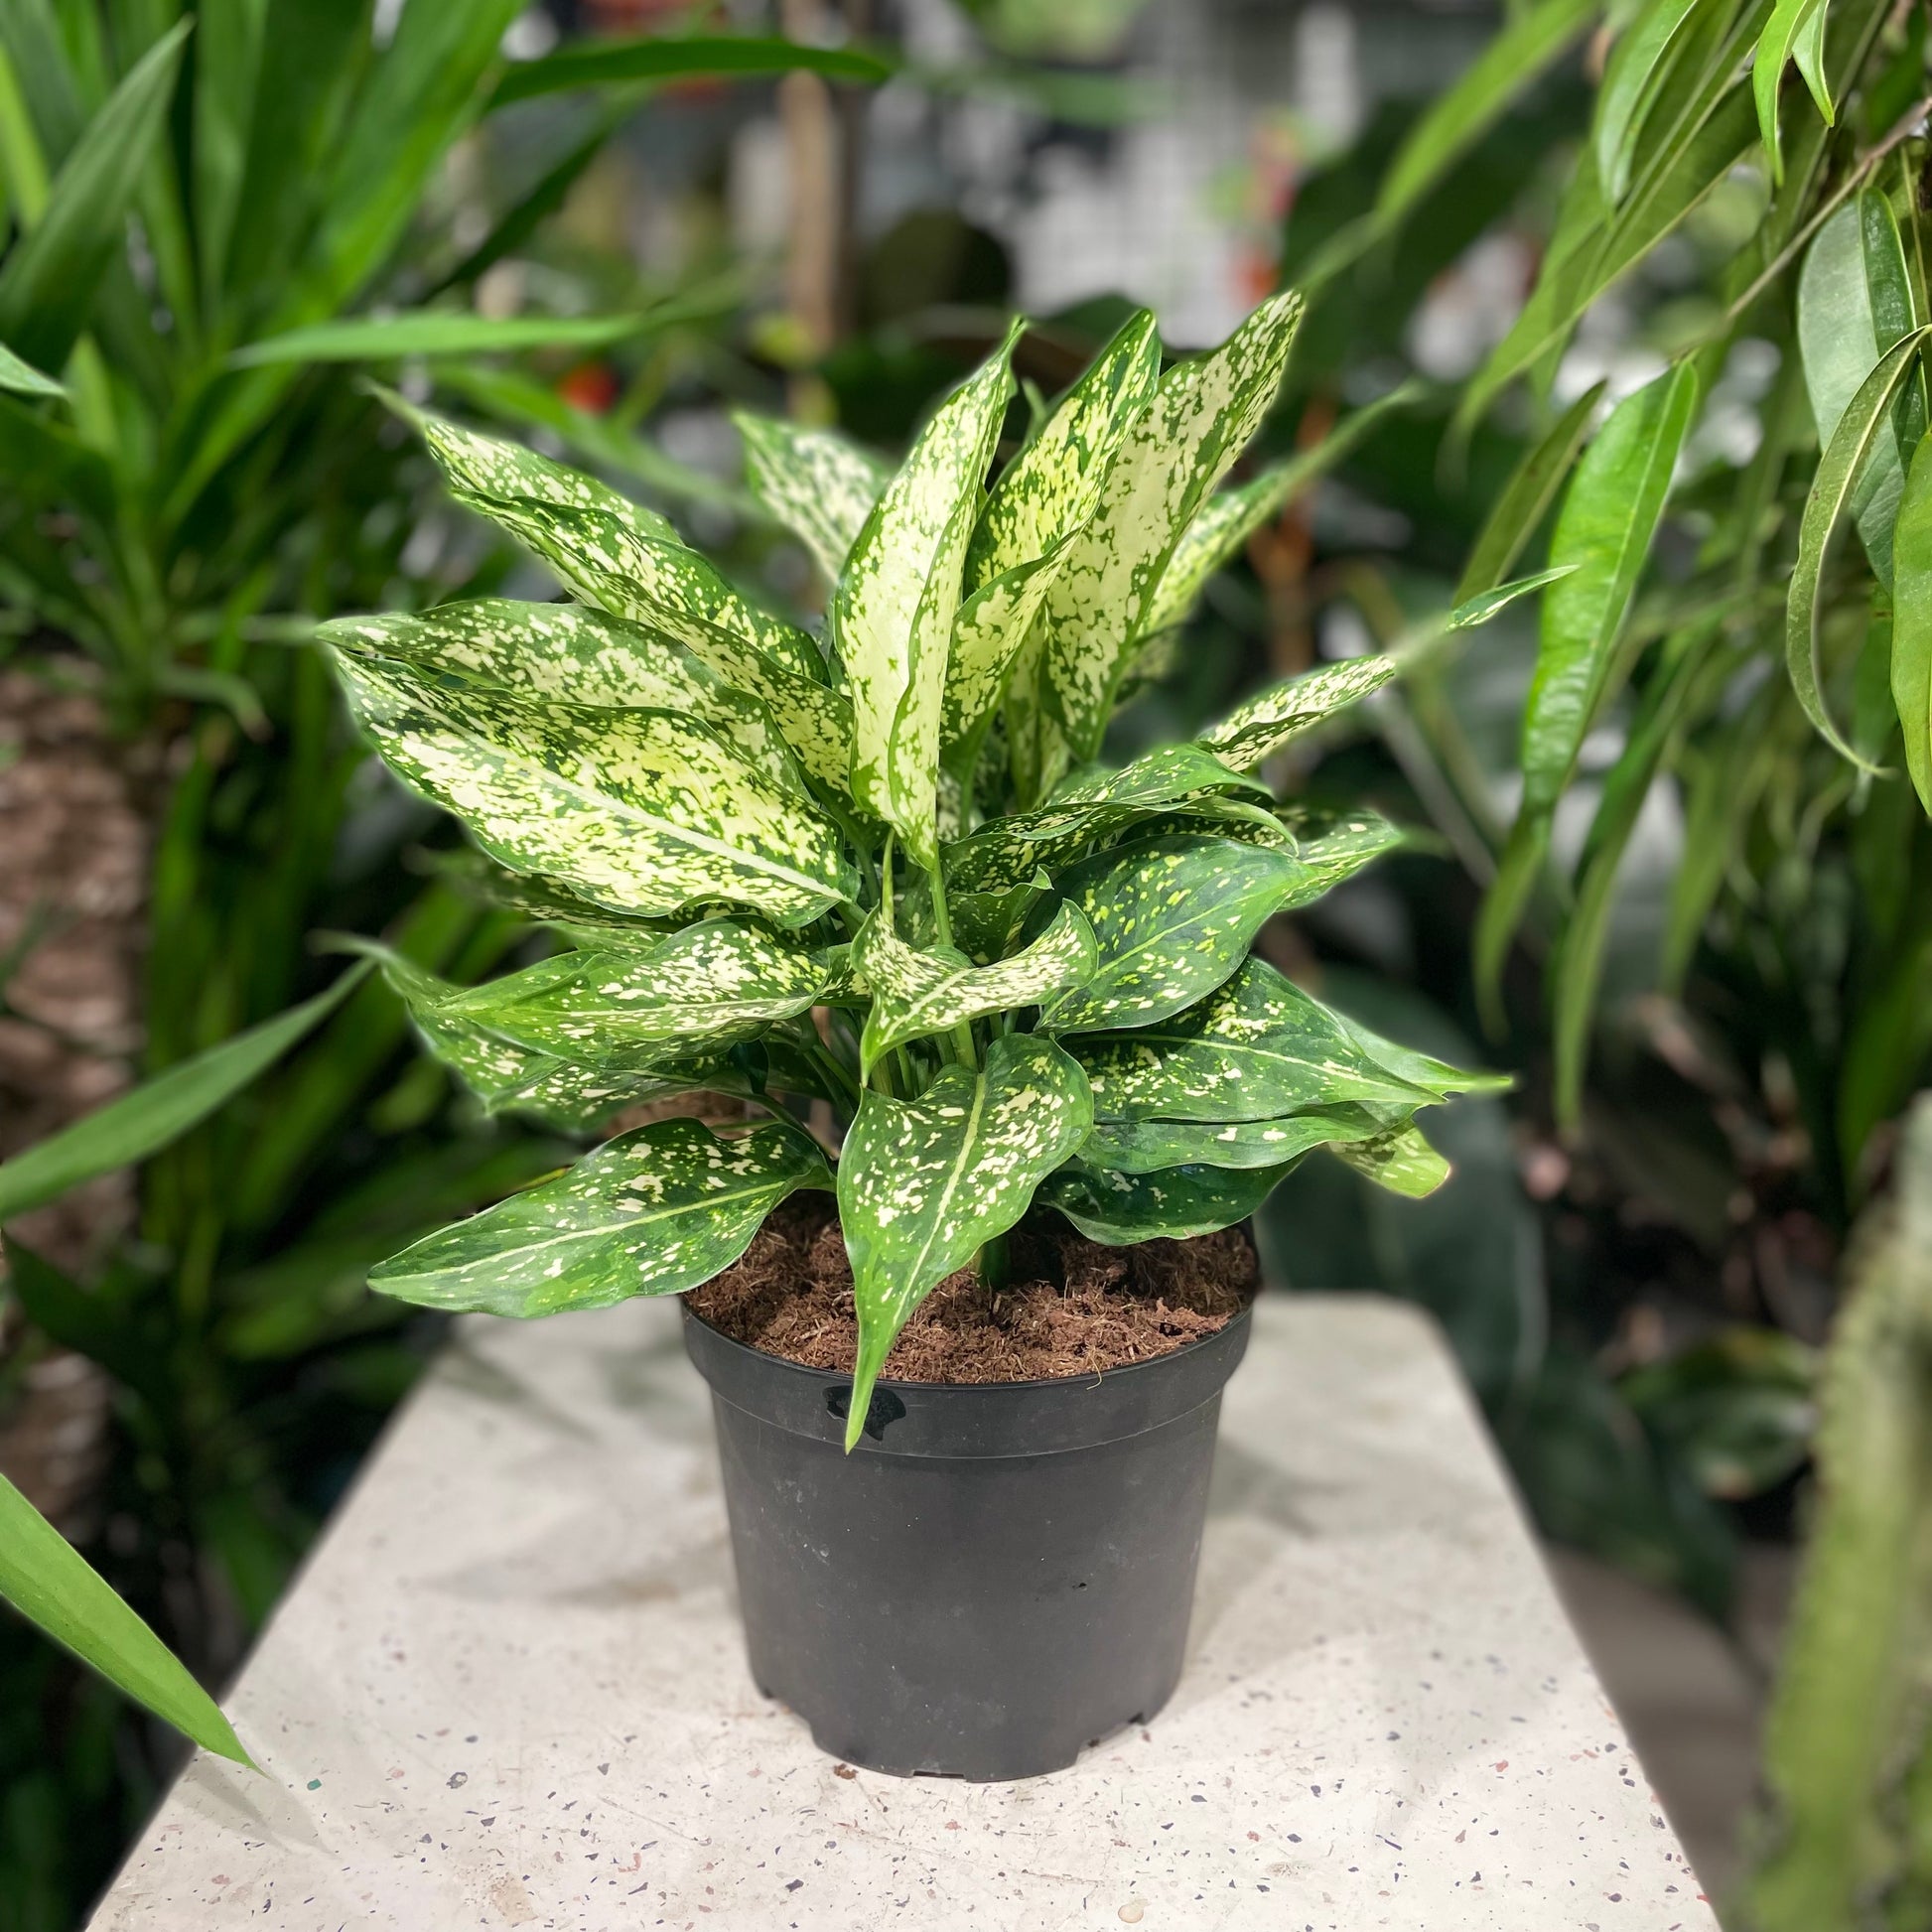 Chinese evergreen, Philippine evergreen (Aglaonema) in a 6 inch pot. Indoor plant for sale by Promise Supply for delivery and pickup in Toronto